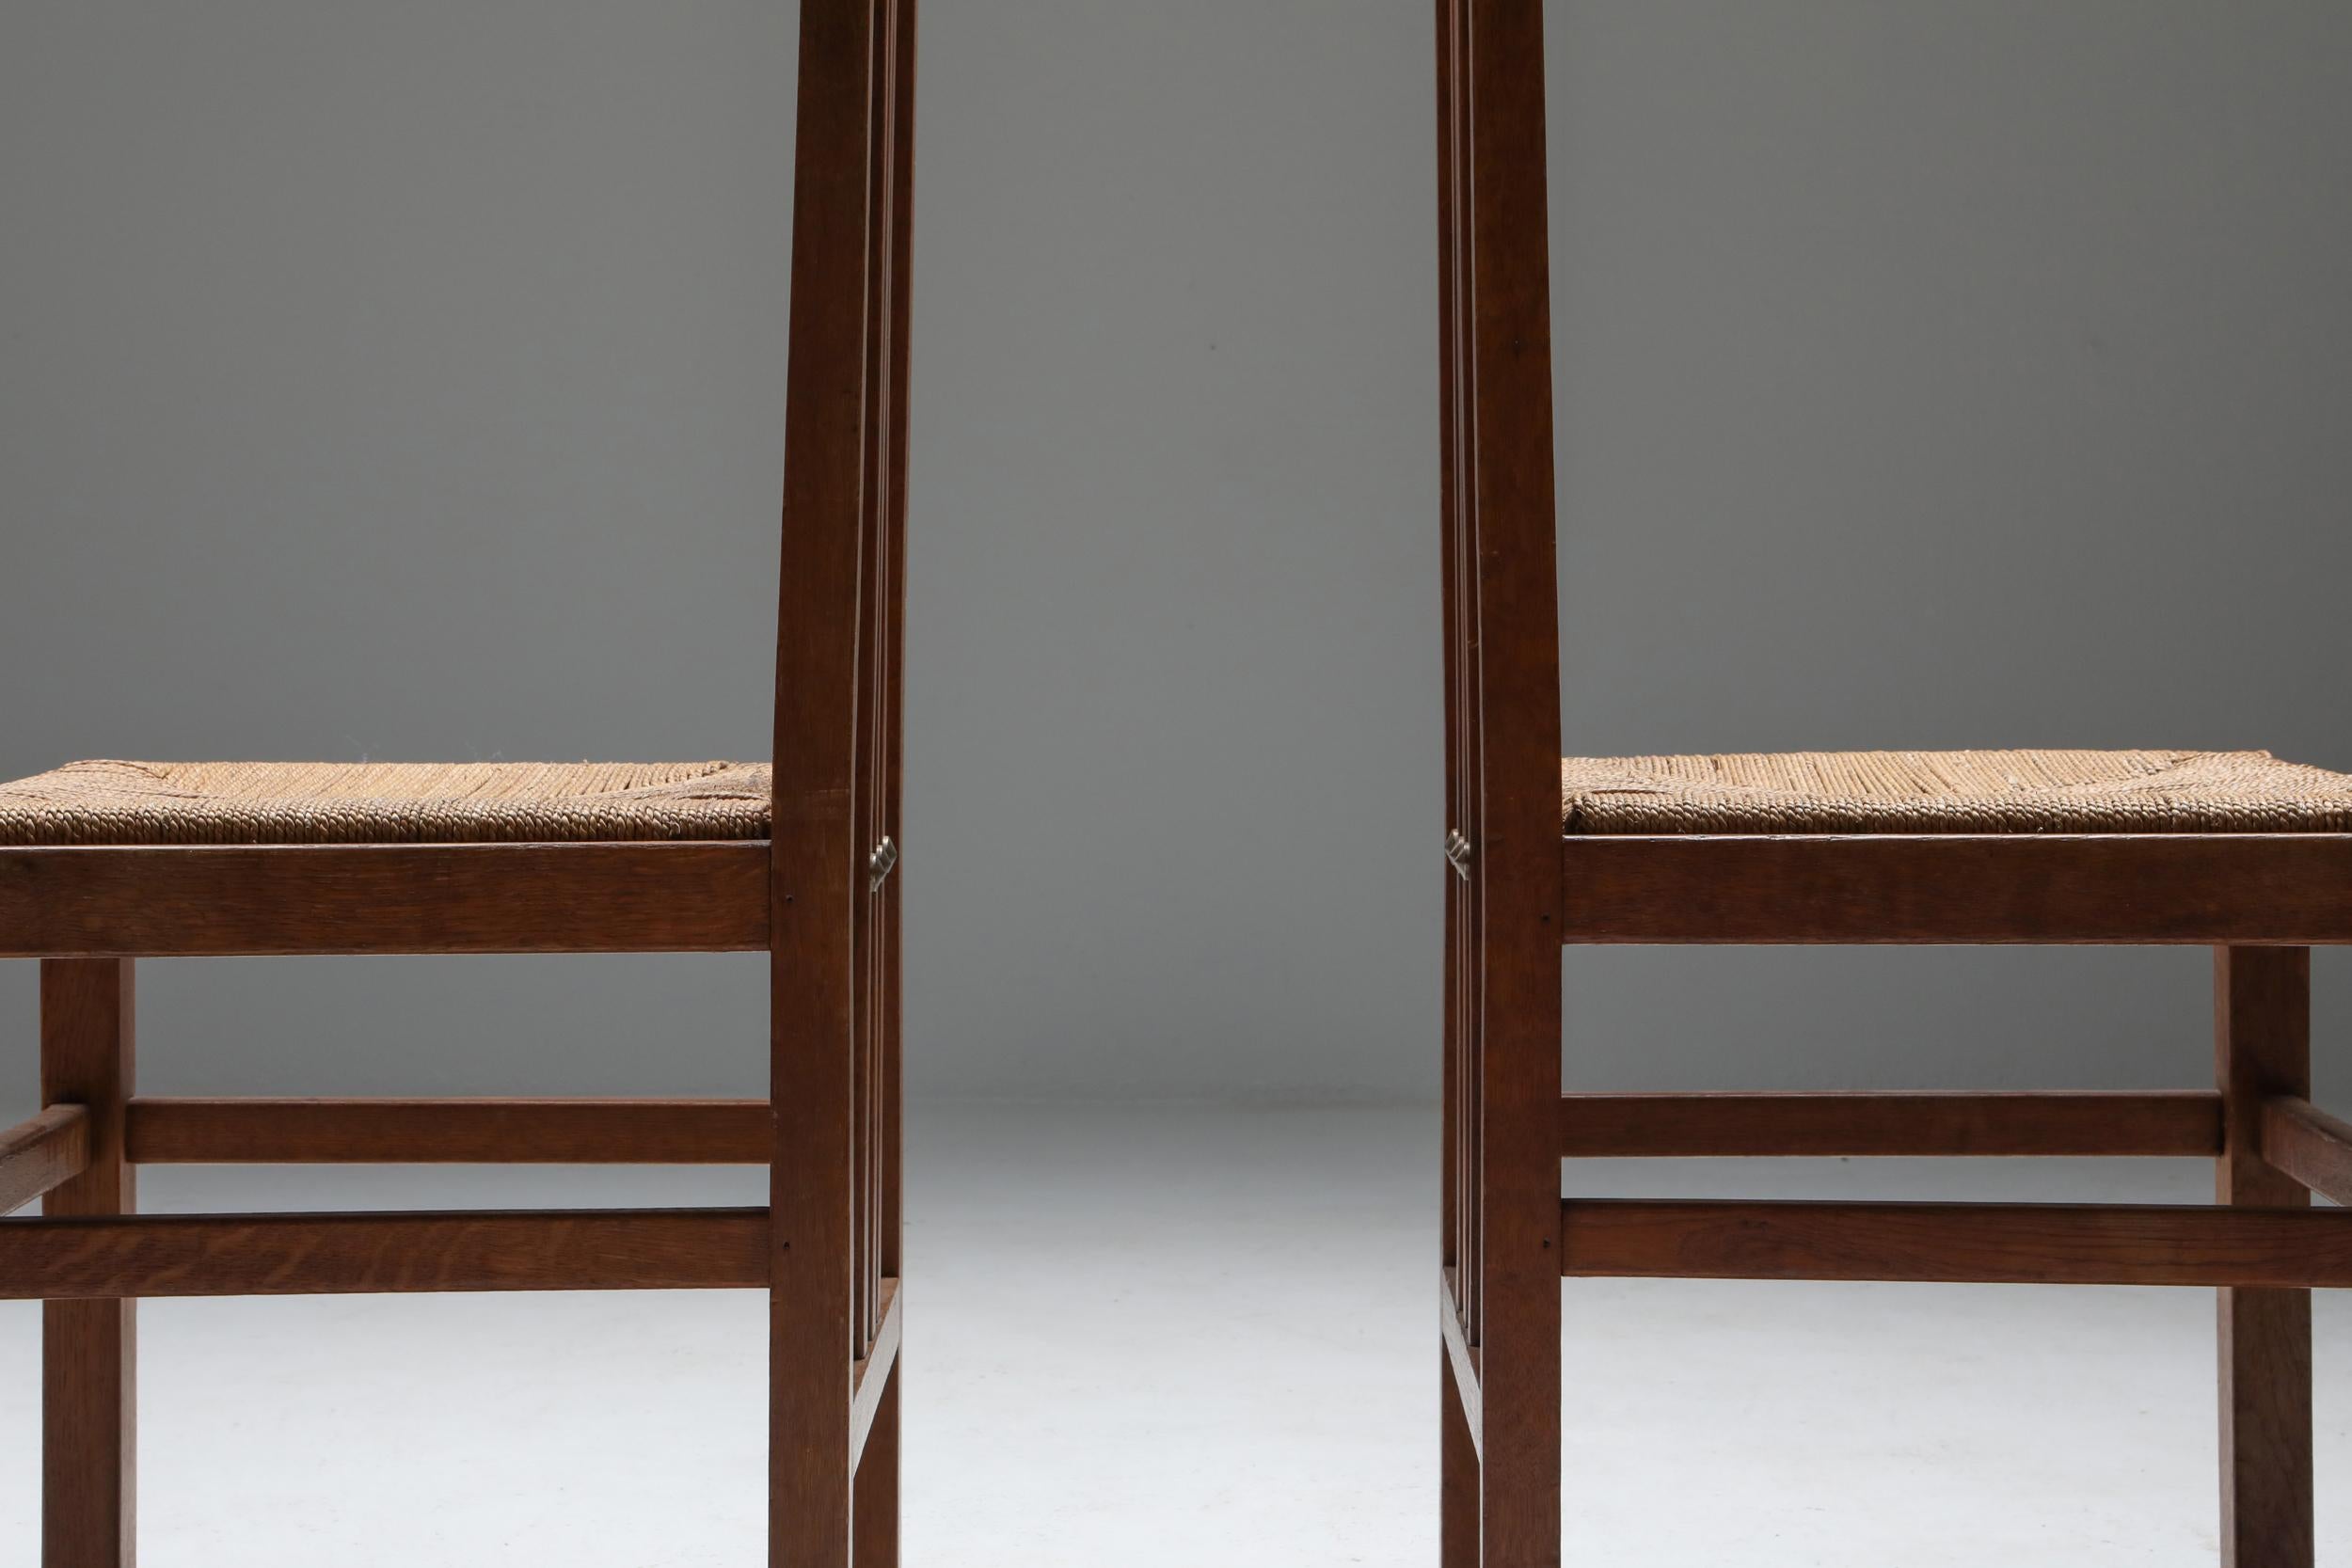 Dutch Modernist High Back Chairs with Cord Seating, 1920s For Sale 2